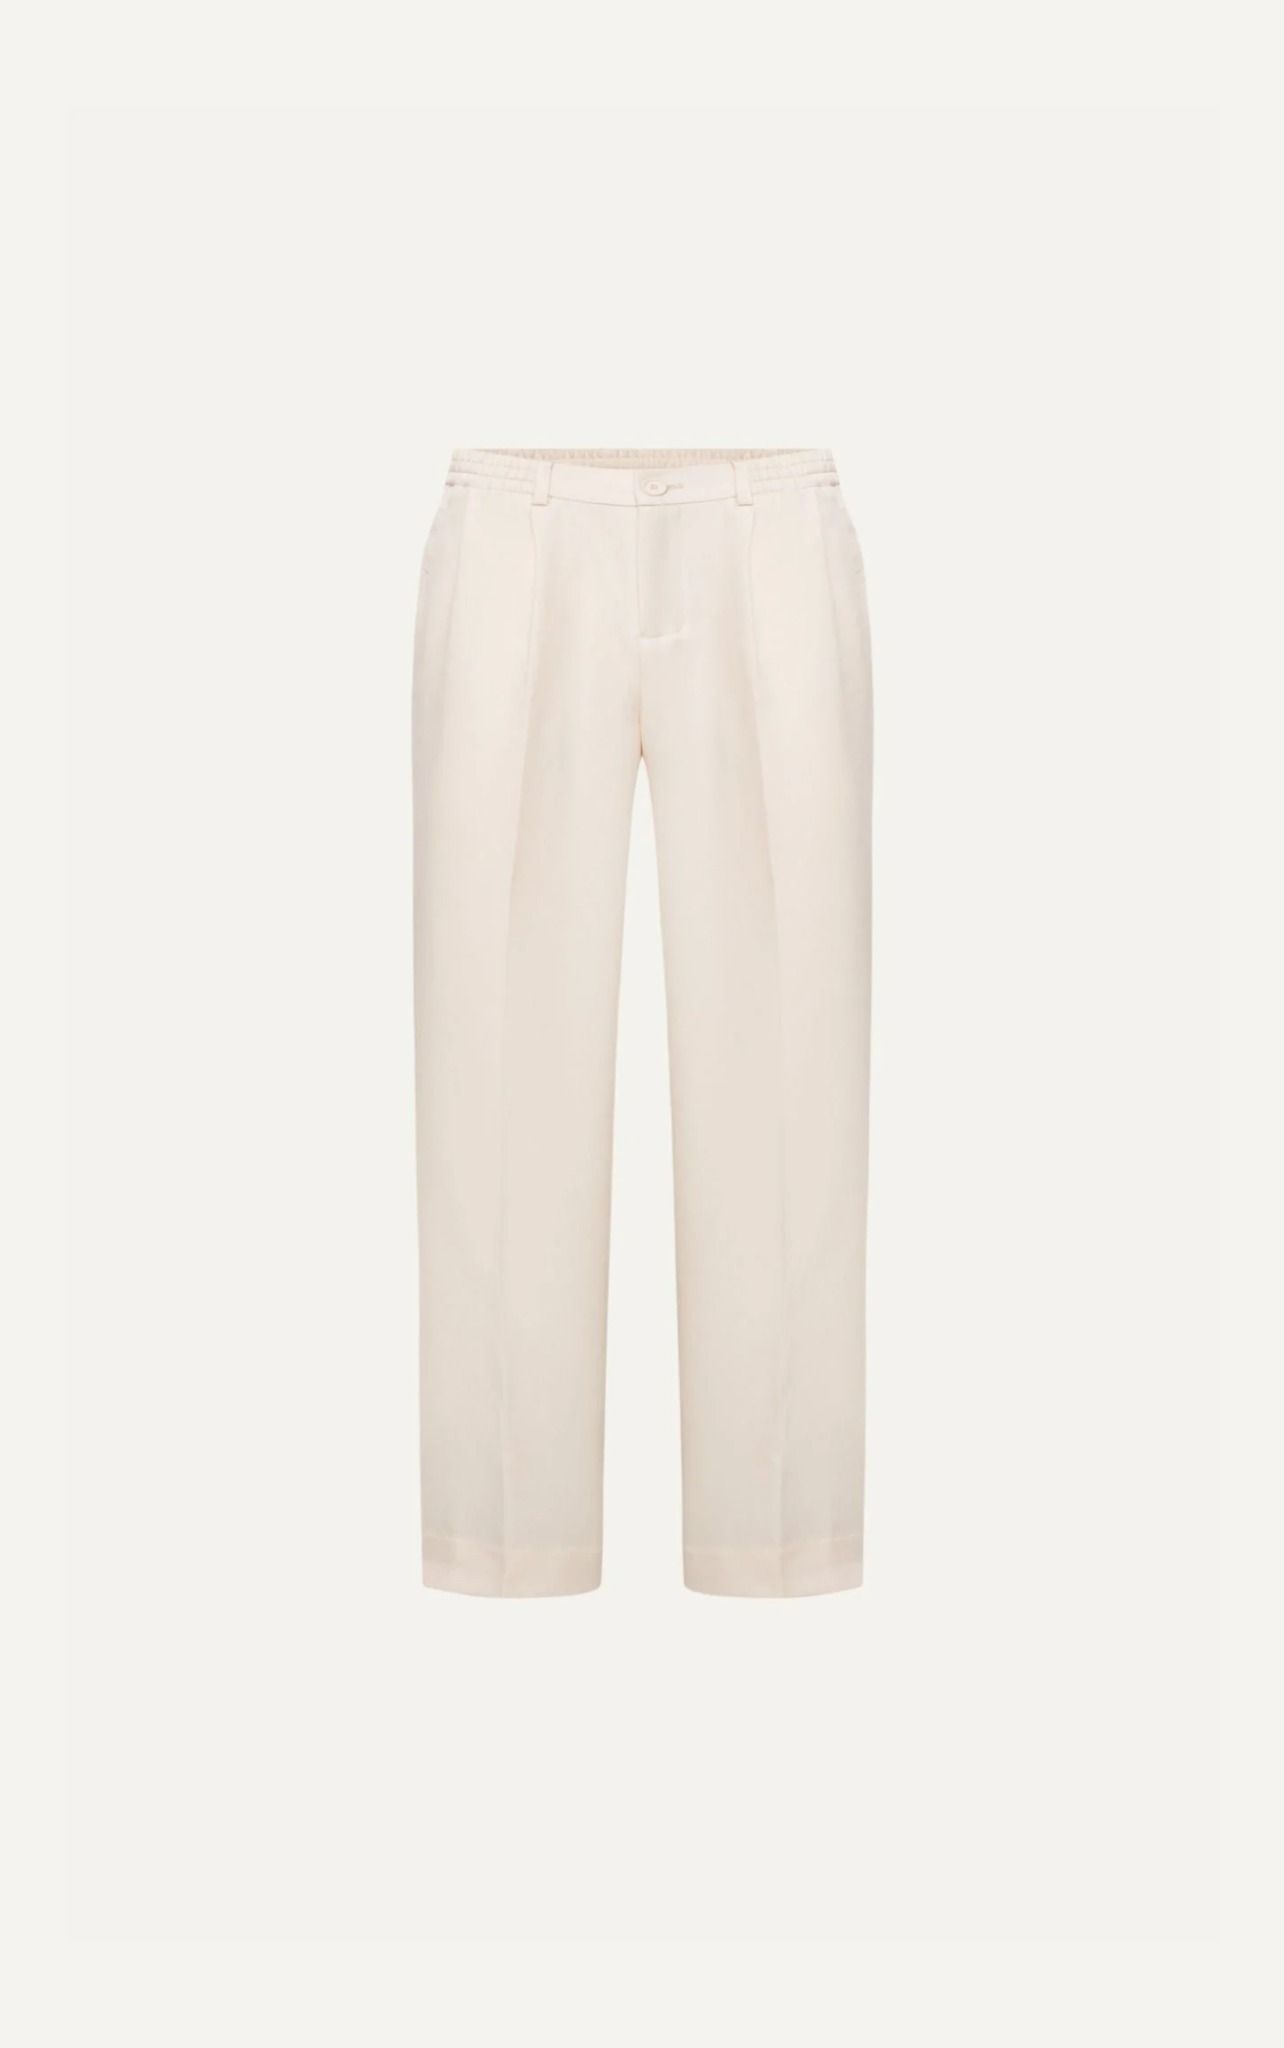  AG19 STUDIO LOOSE FIT RELAX TROUSERS - OFF WHITE 